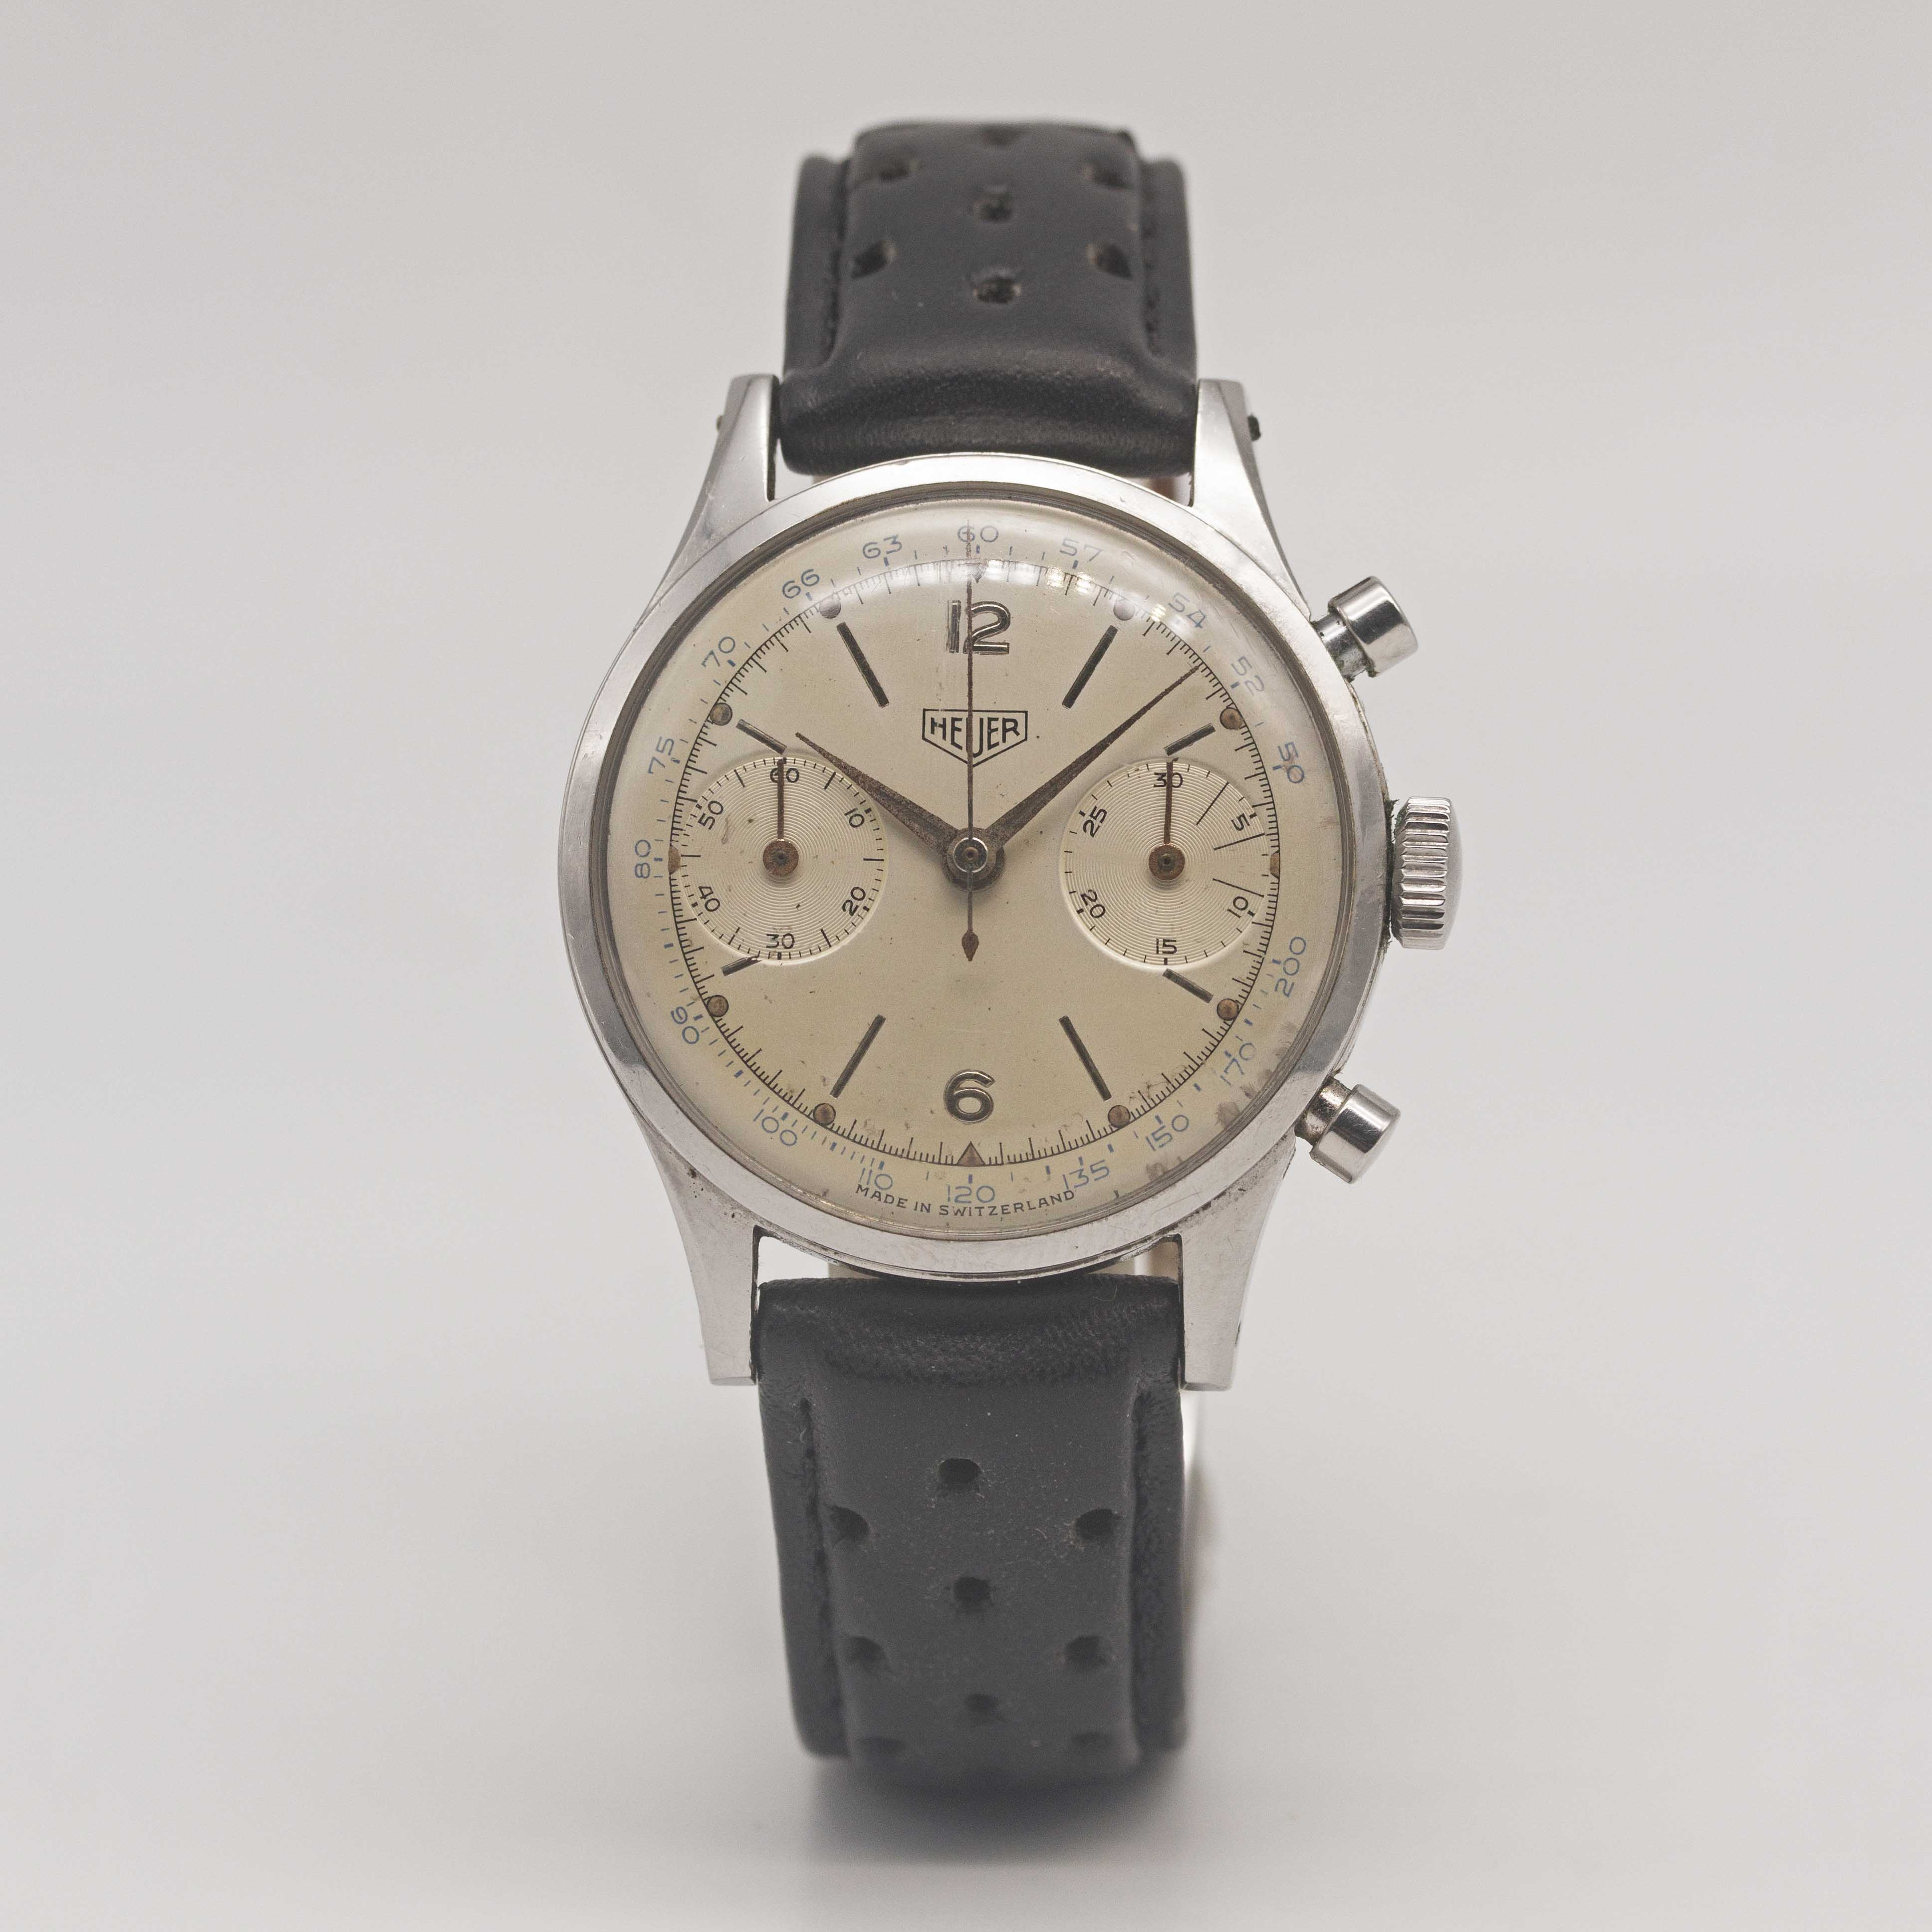 A RARE GENTLEMAN'S LARGE SIZE STAINLESS STEEL HEUER "WATERPROOF" CHRONOGRAPH WRIST WATCH CIRCA - Image 3 of 11